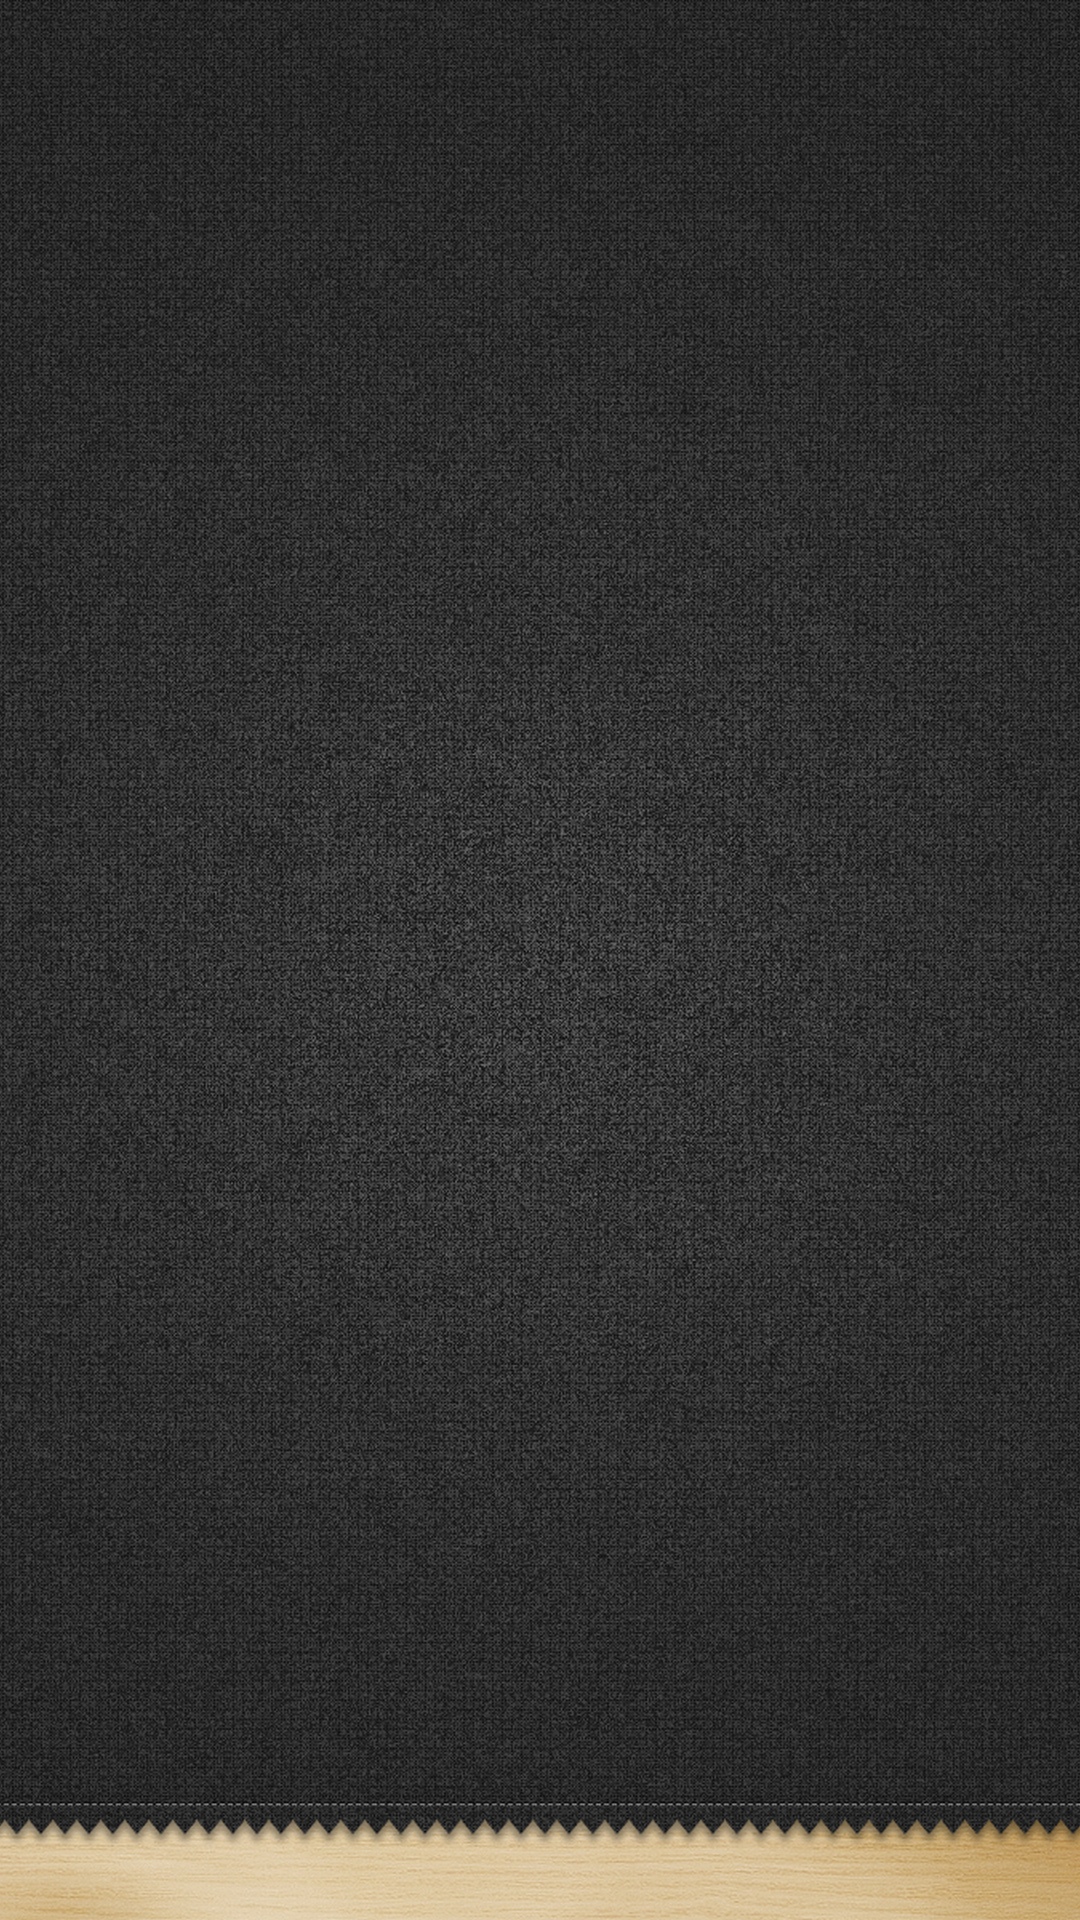 Wallpaper for galaxy s4 with gray fabric texture design in 1080x1920